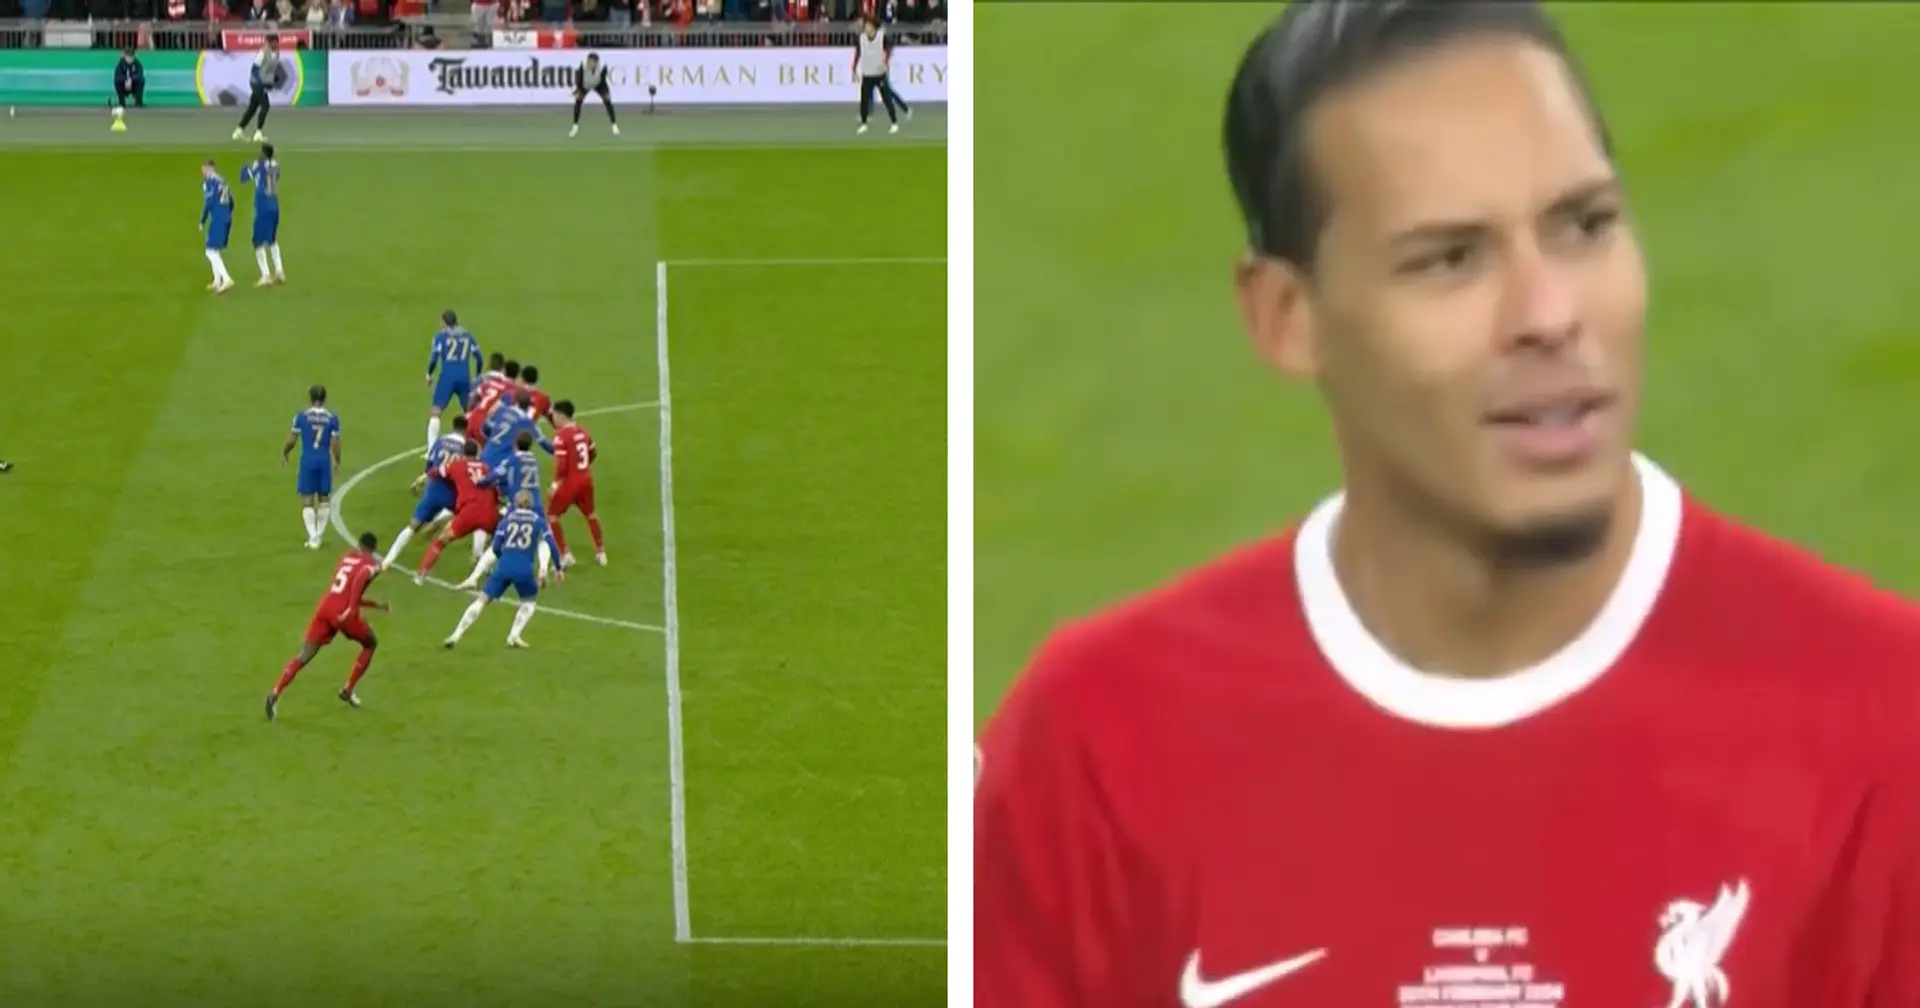 'Can’t believe we’ve got away with that': Chelsea fans react as Van Dijk's goal gets ruled out